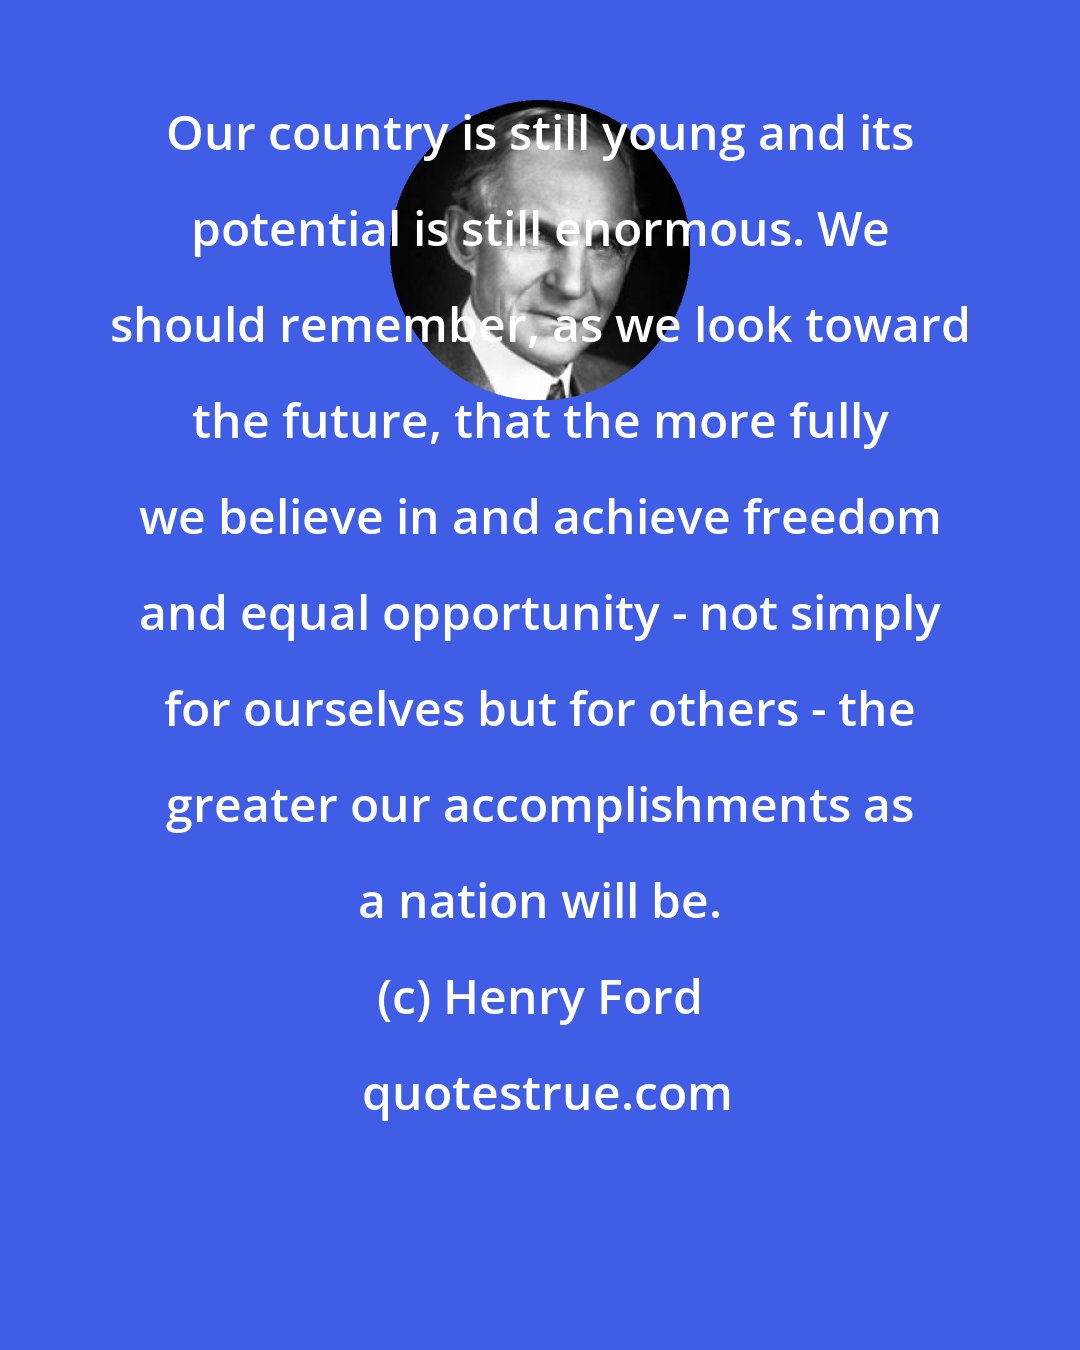 Henry Ford: Our country is still young and its potential is still enormous. We should remember, as we look toward the future, that the more fully we believe in and achieve freedom and equal opportunity - not simply for ourselves but for others - the greater our accomplishments as a nation will be.